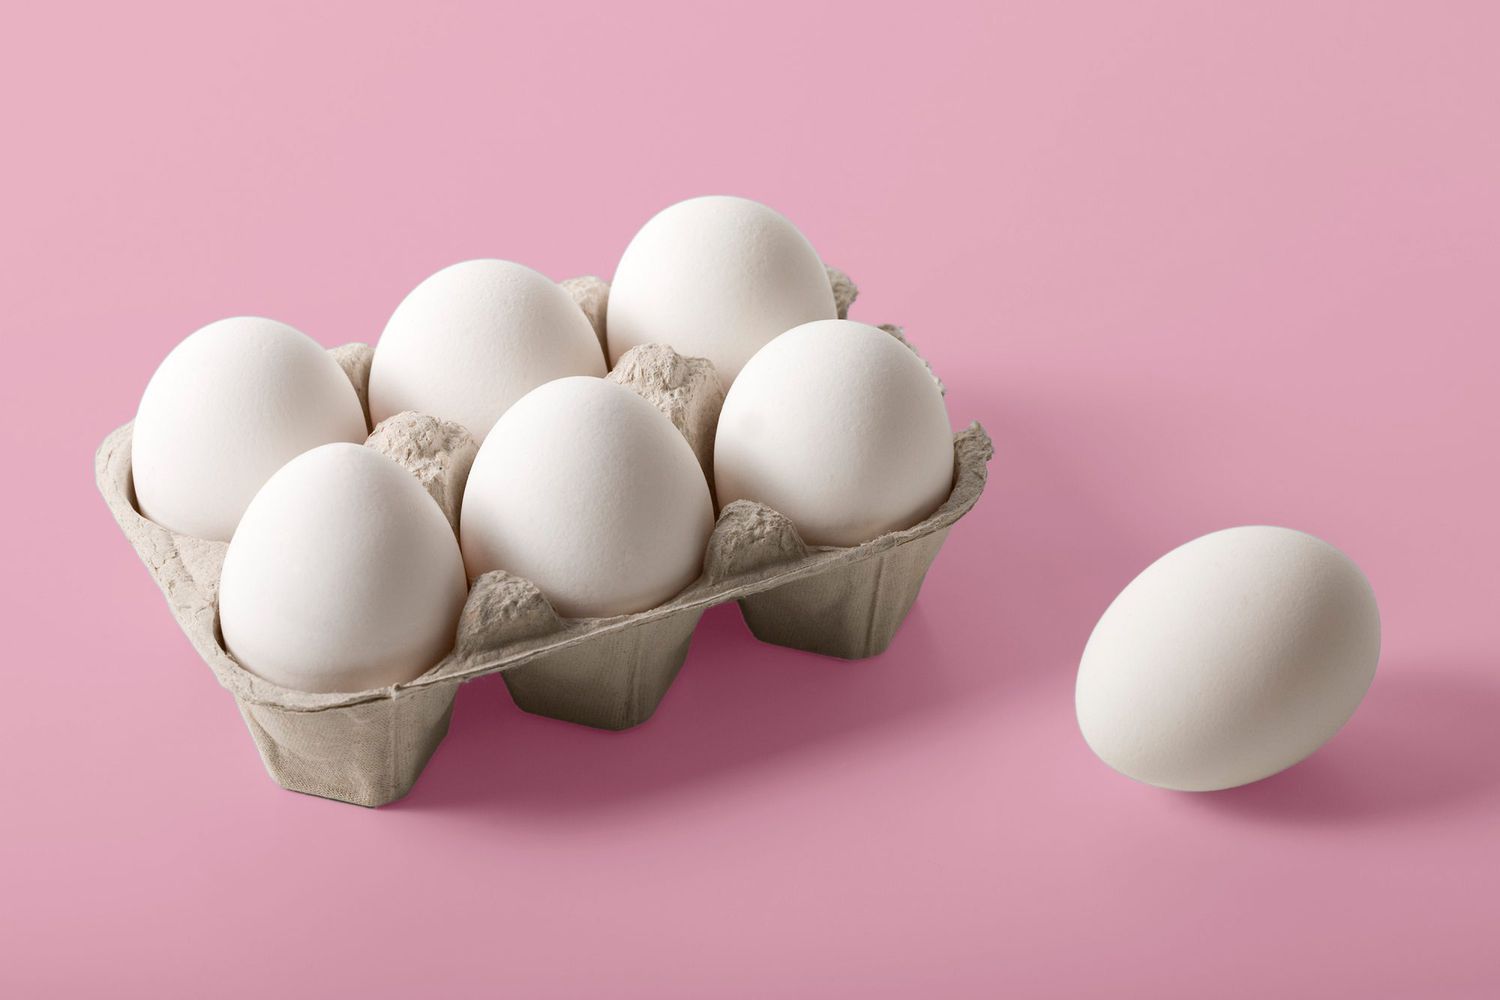 A carton of six eggs on a pink background